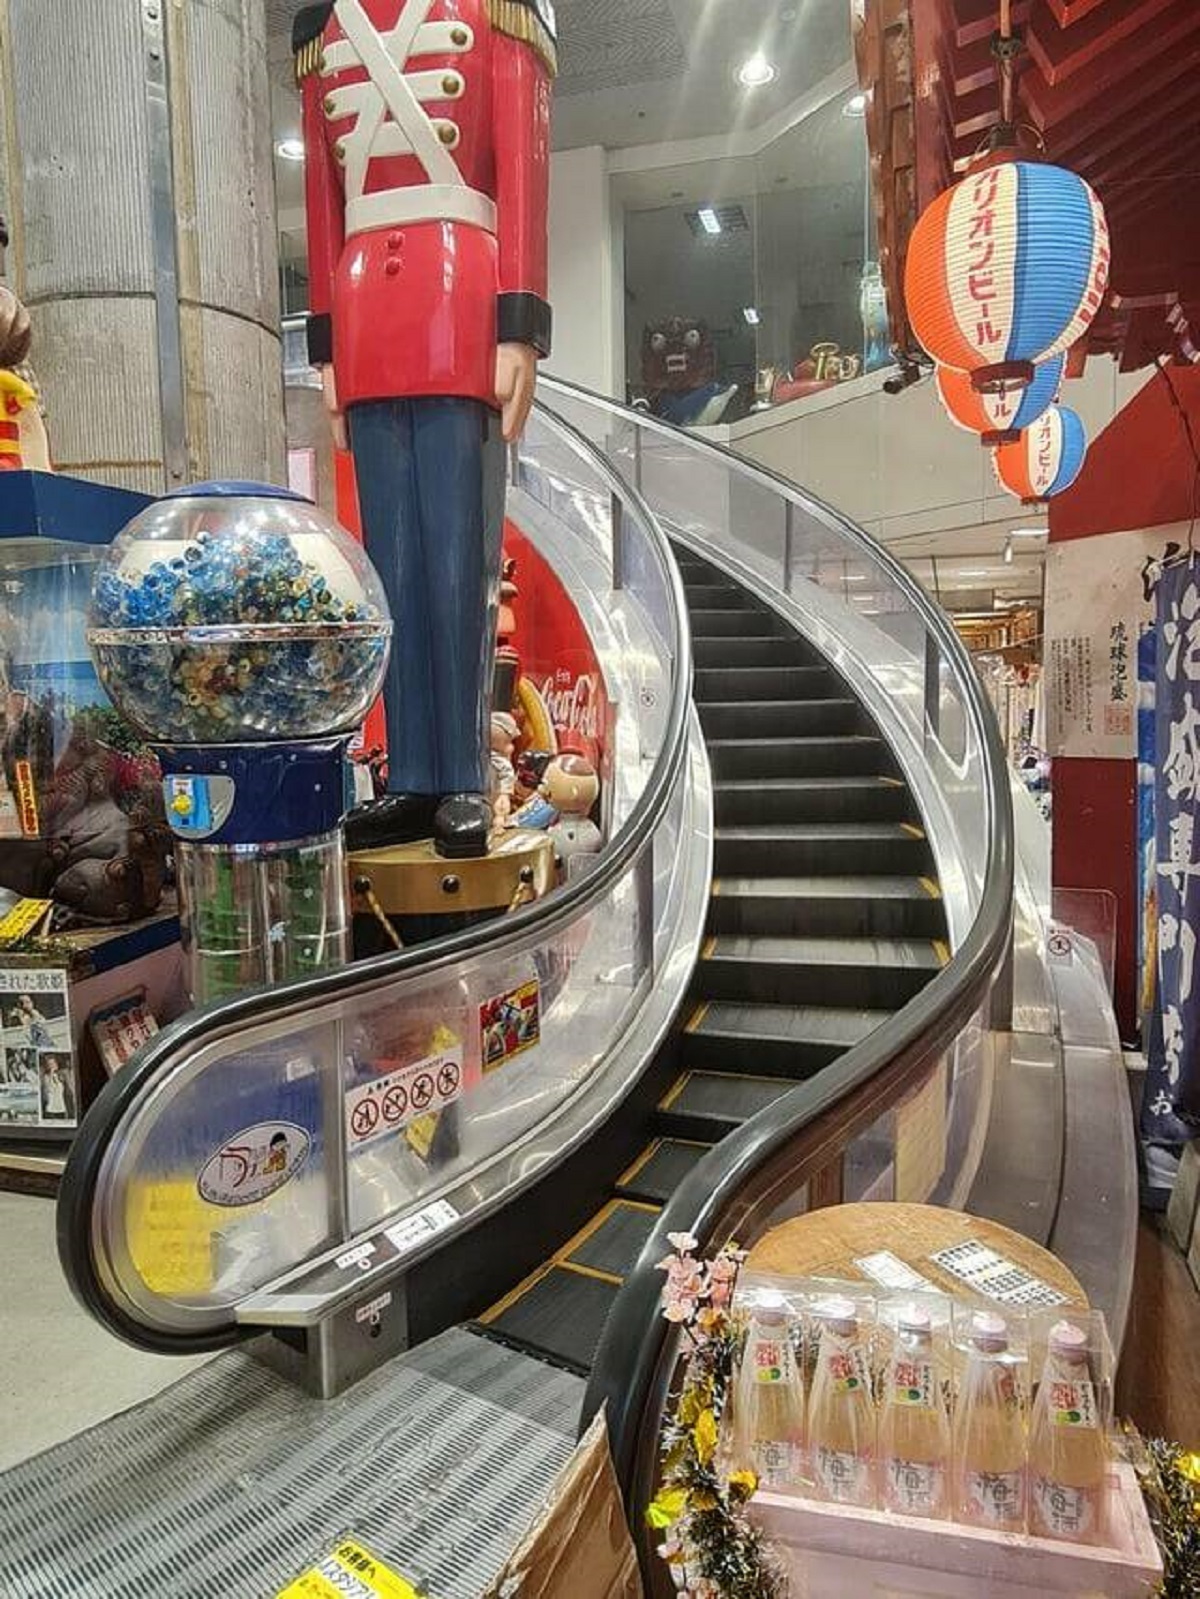 "This curved escalator"